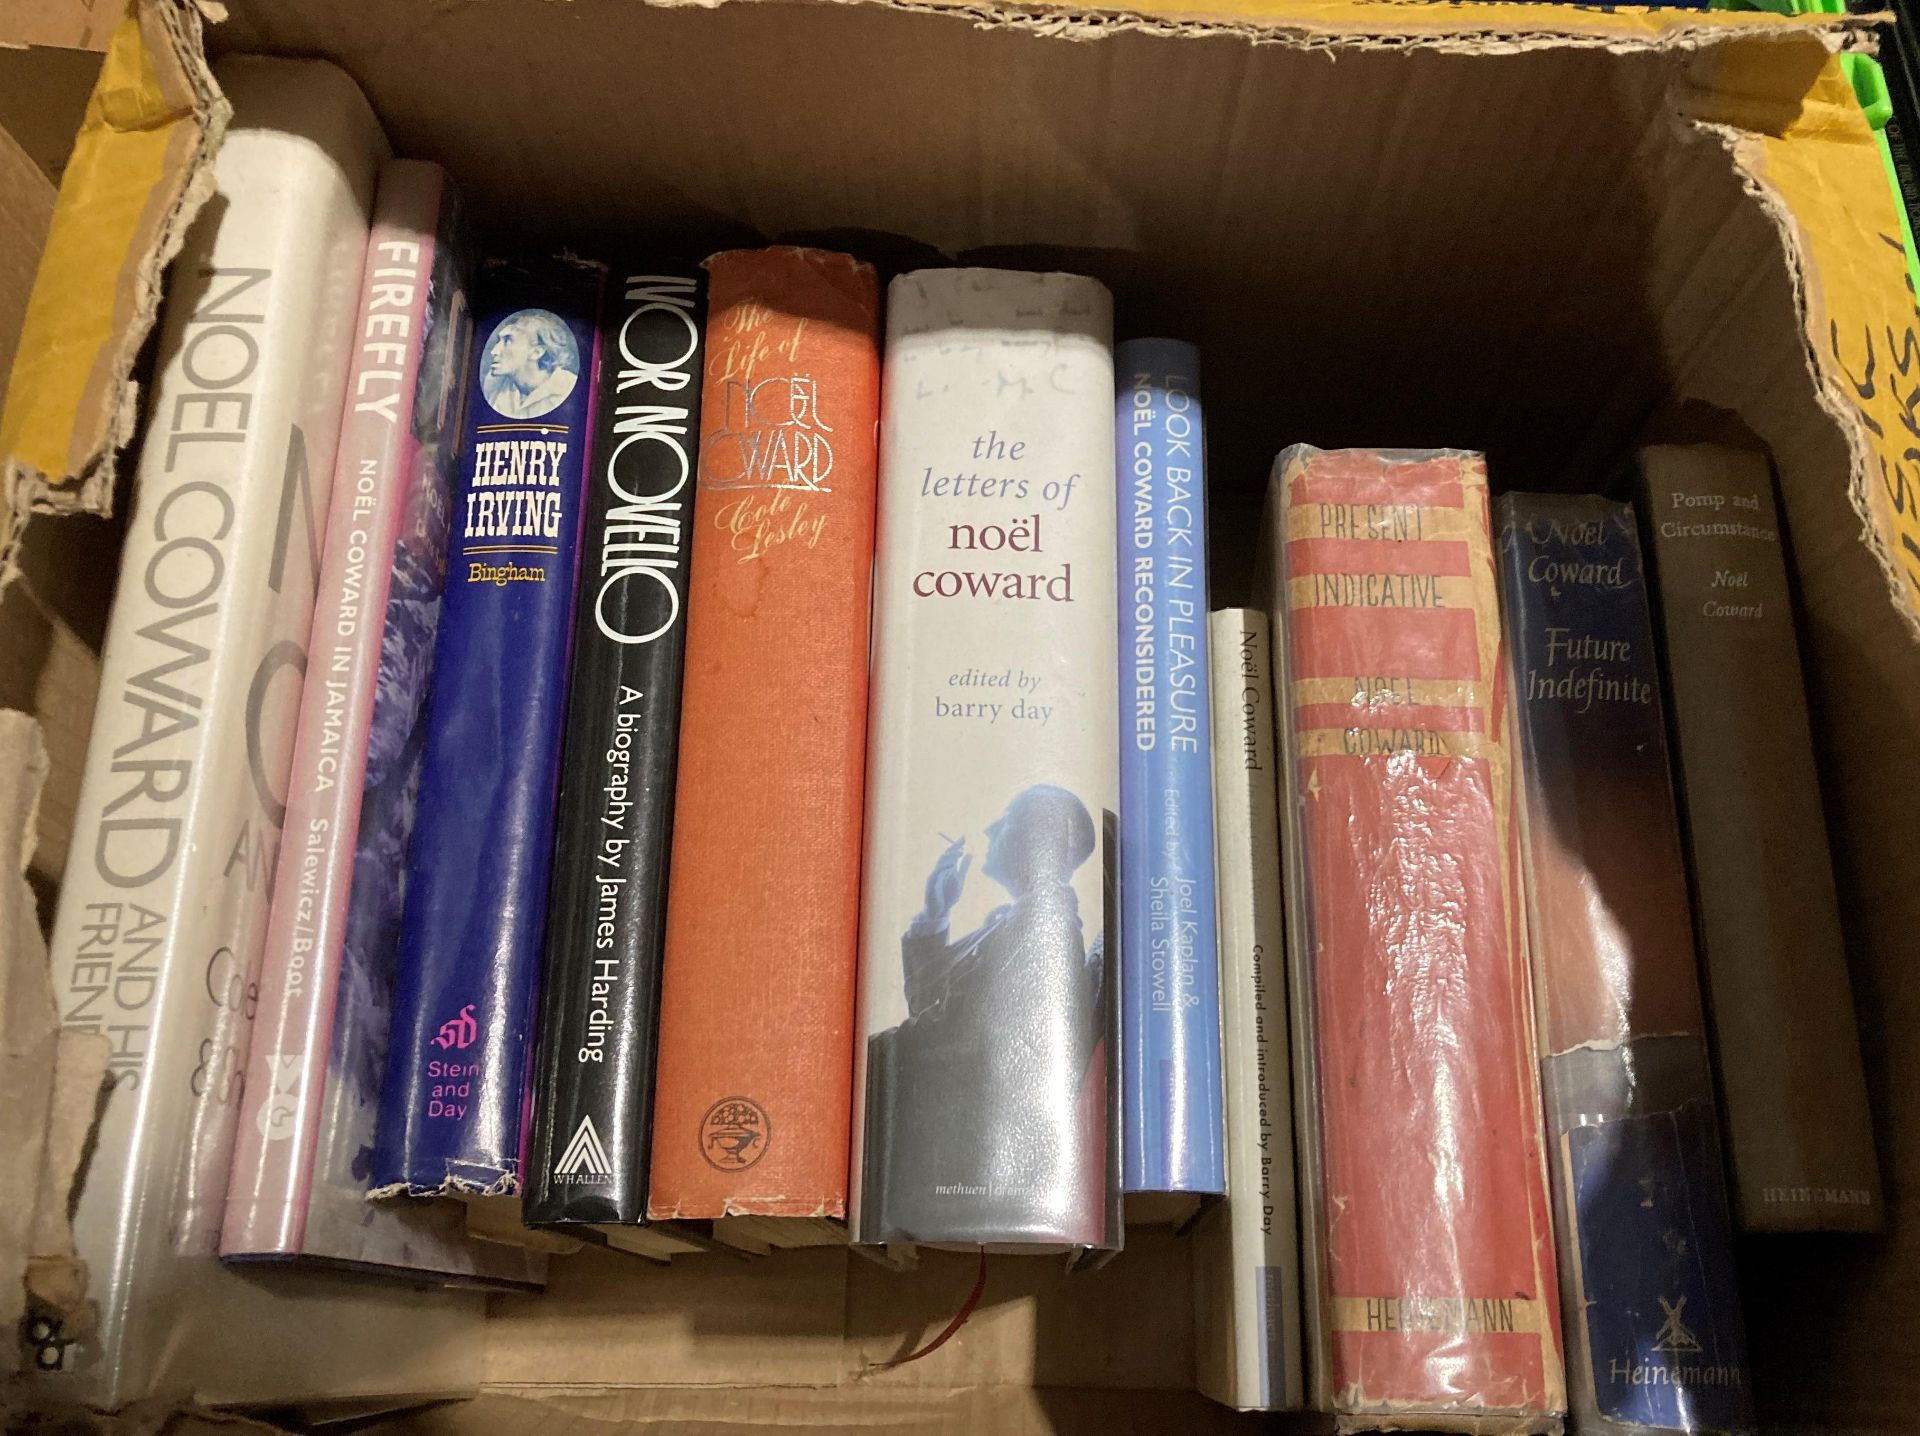 Noël Coward nine books by or on Coward including three First Editions - 'Present Indicative' - an